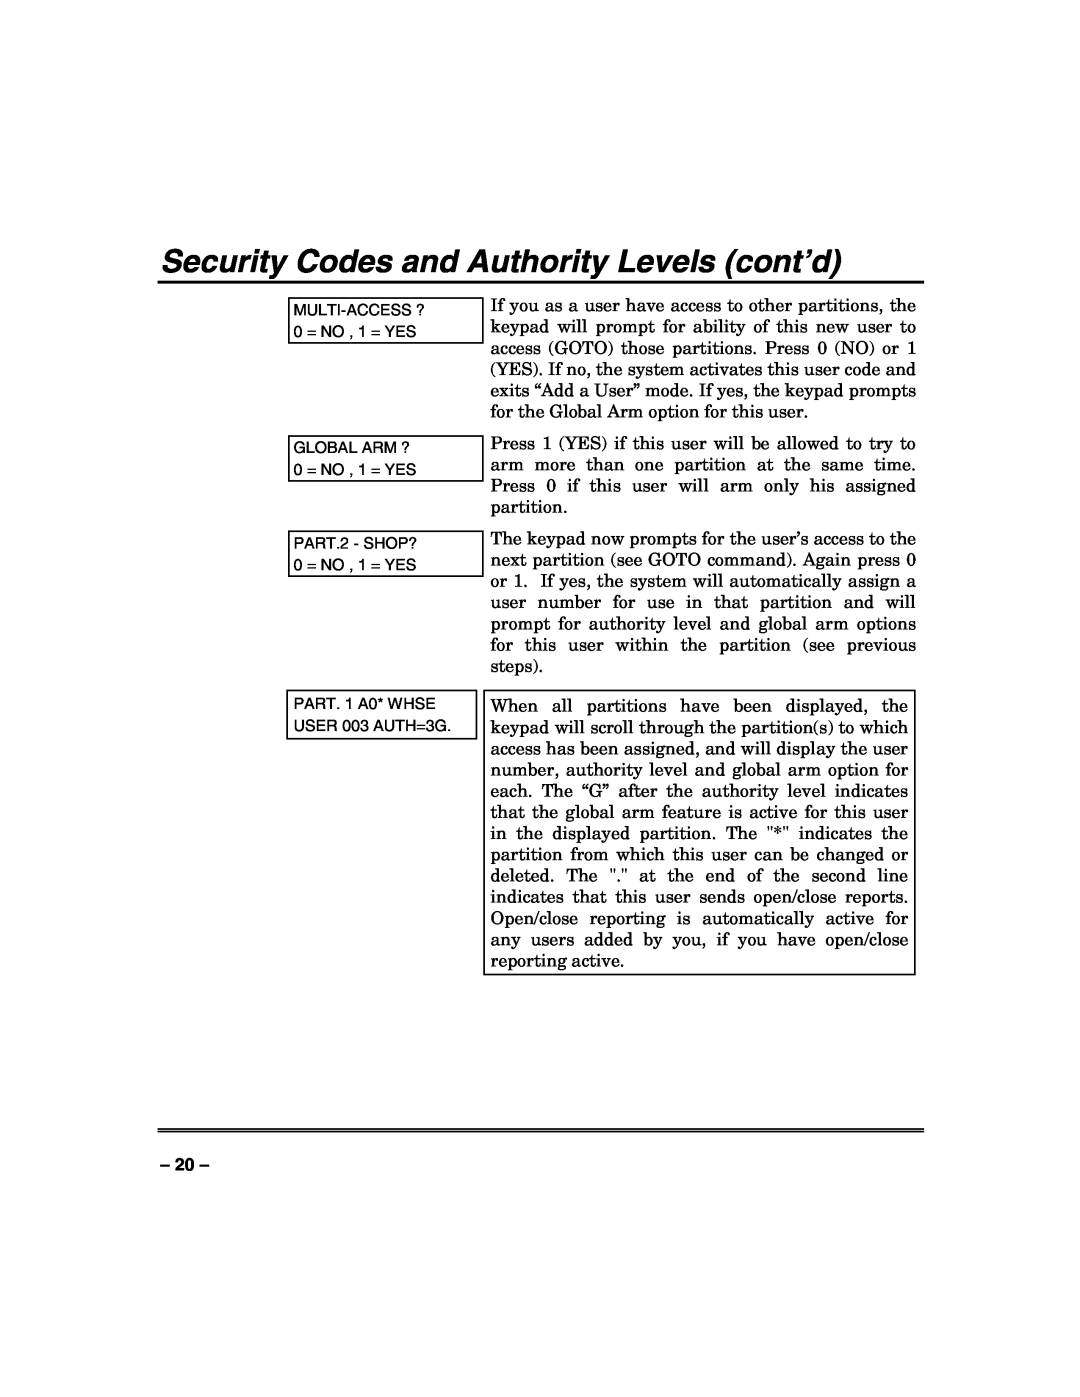 Honeywell VISTA-250FBP, VISTA-128FBP manual Security Codes and Authority Levels cont’d, MULTI-ACCESS? 0 = NO , 1 = YES 